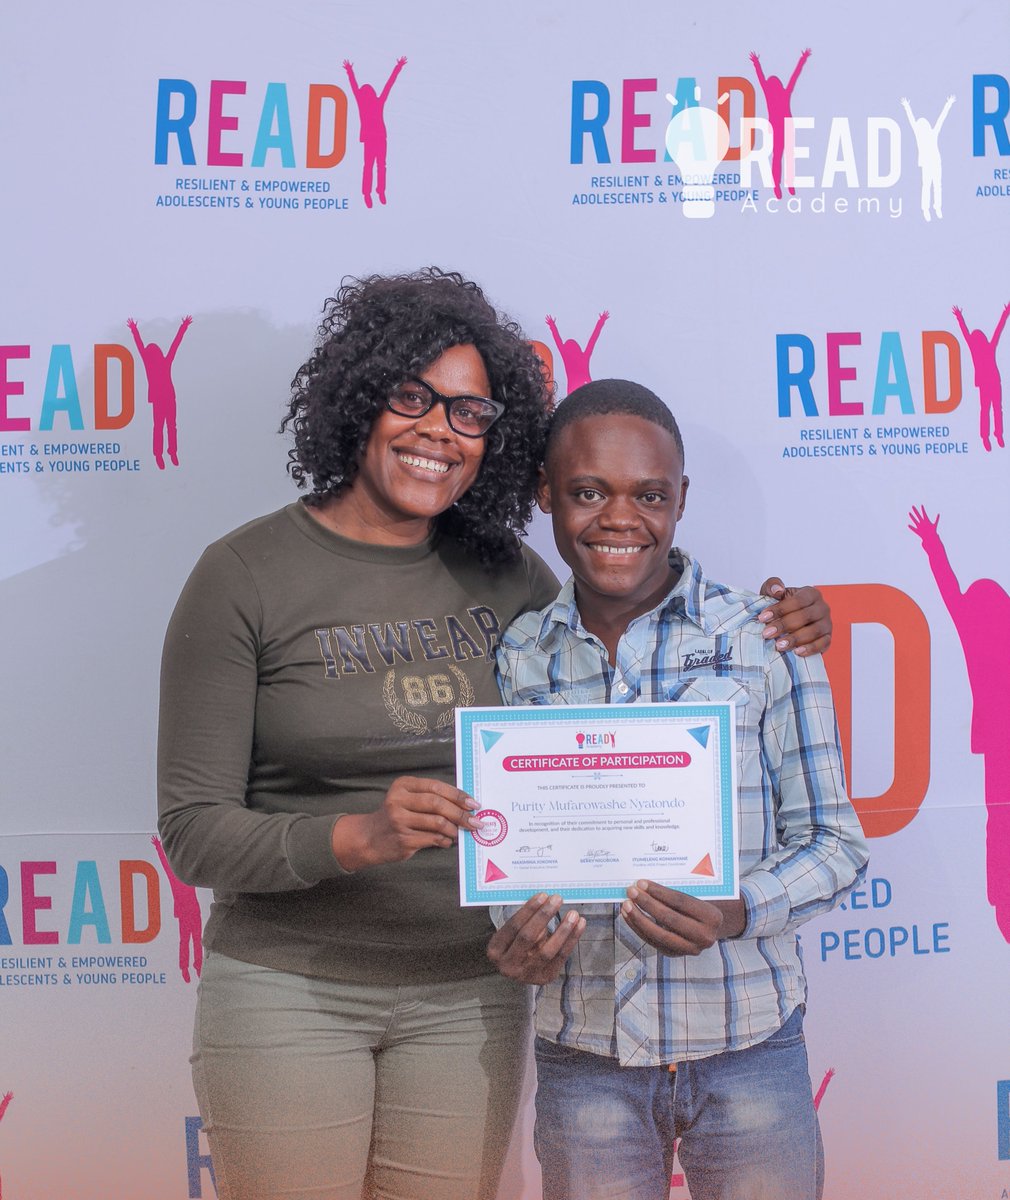 Thank you to the team for making the #READYAcademy2024🇸🇿 a great success. Here are a few snapshots of the incredible READY Faculty team and the graduates 🎓